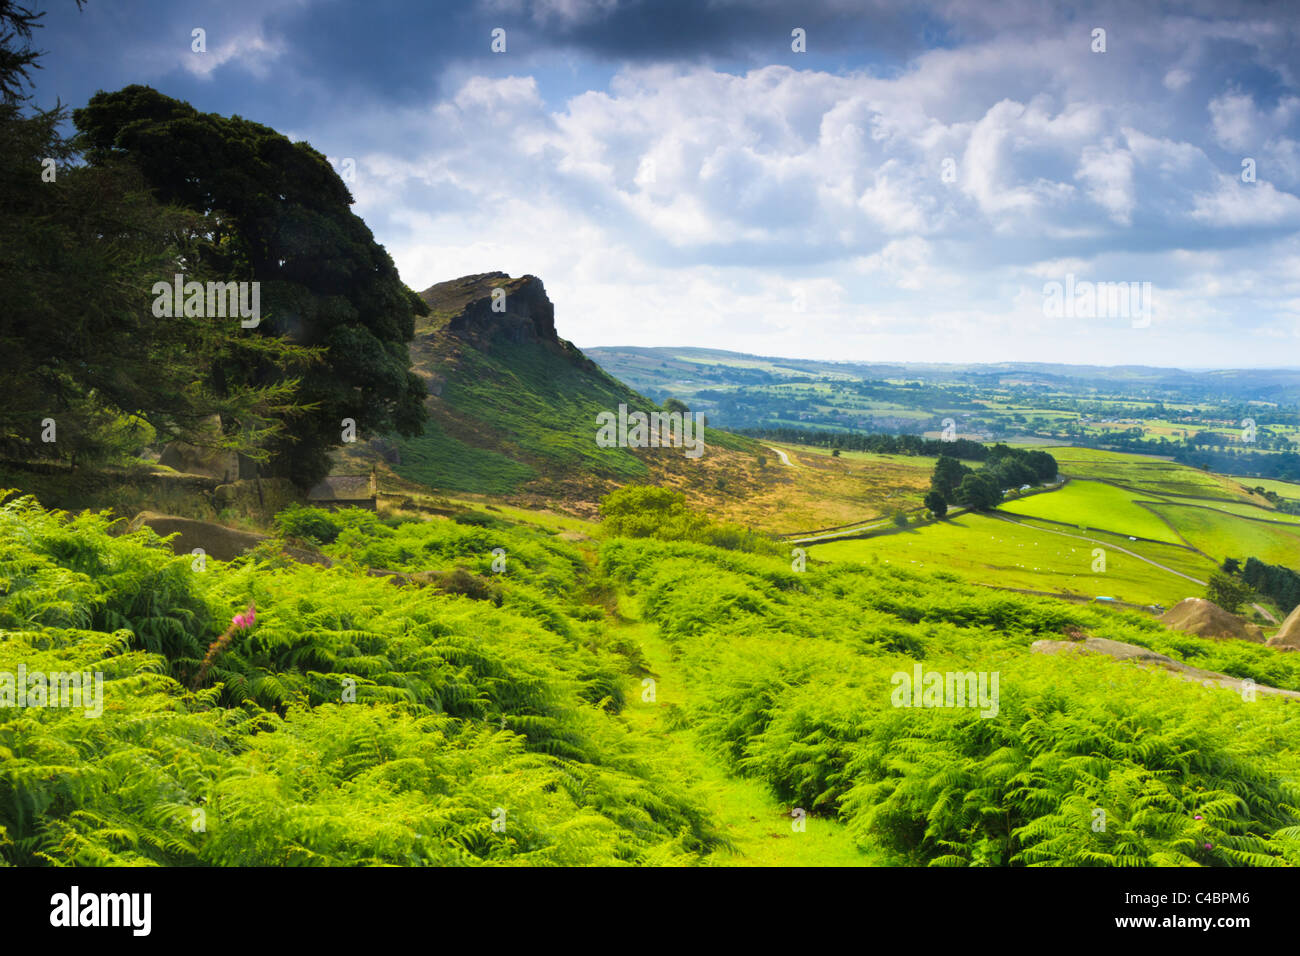 The Roaches, a series of outcrops famous for rock climbers set in Staffordshire UK.  Overlooking Tittesworth reservoir Stock Photo